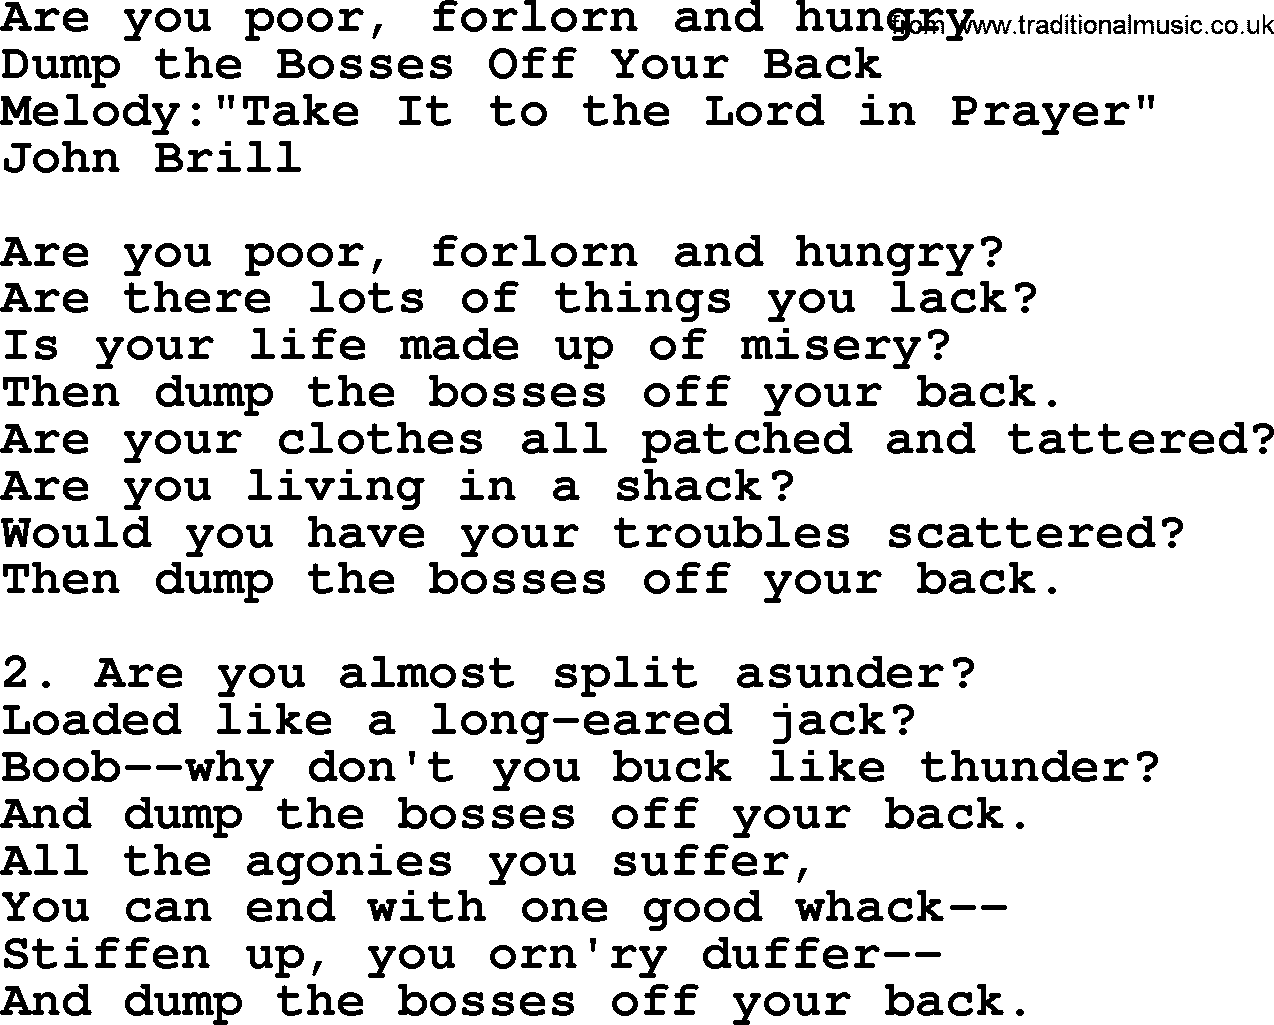 Political, Solidarity, Workers or Union song: Are You Poor Forlorn And Hungry, lyrics